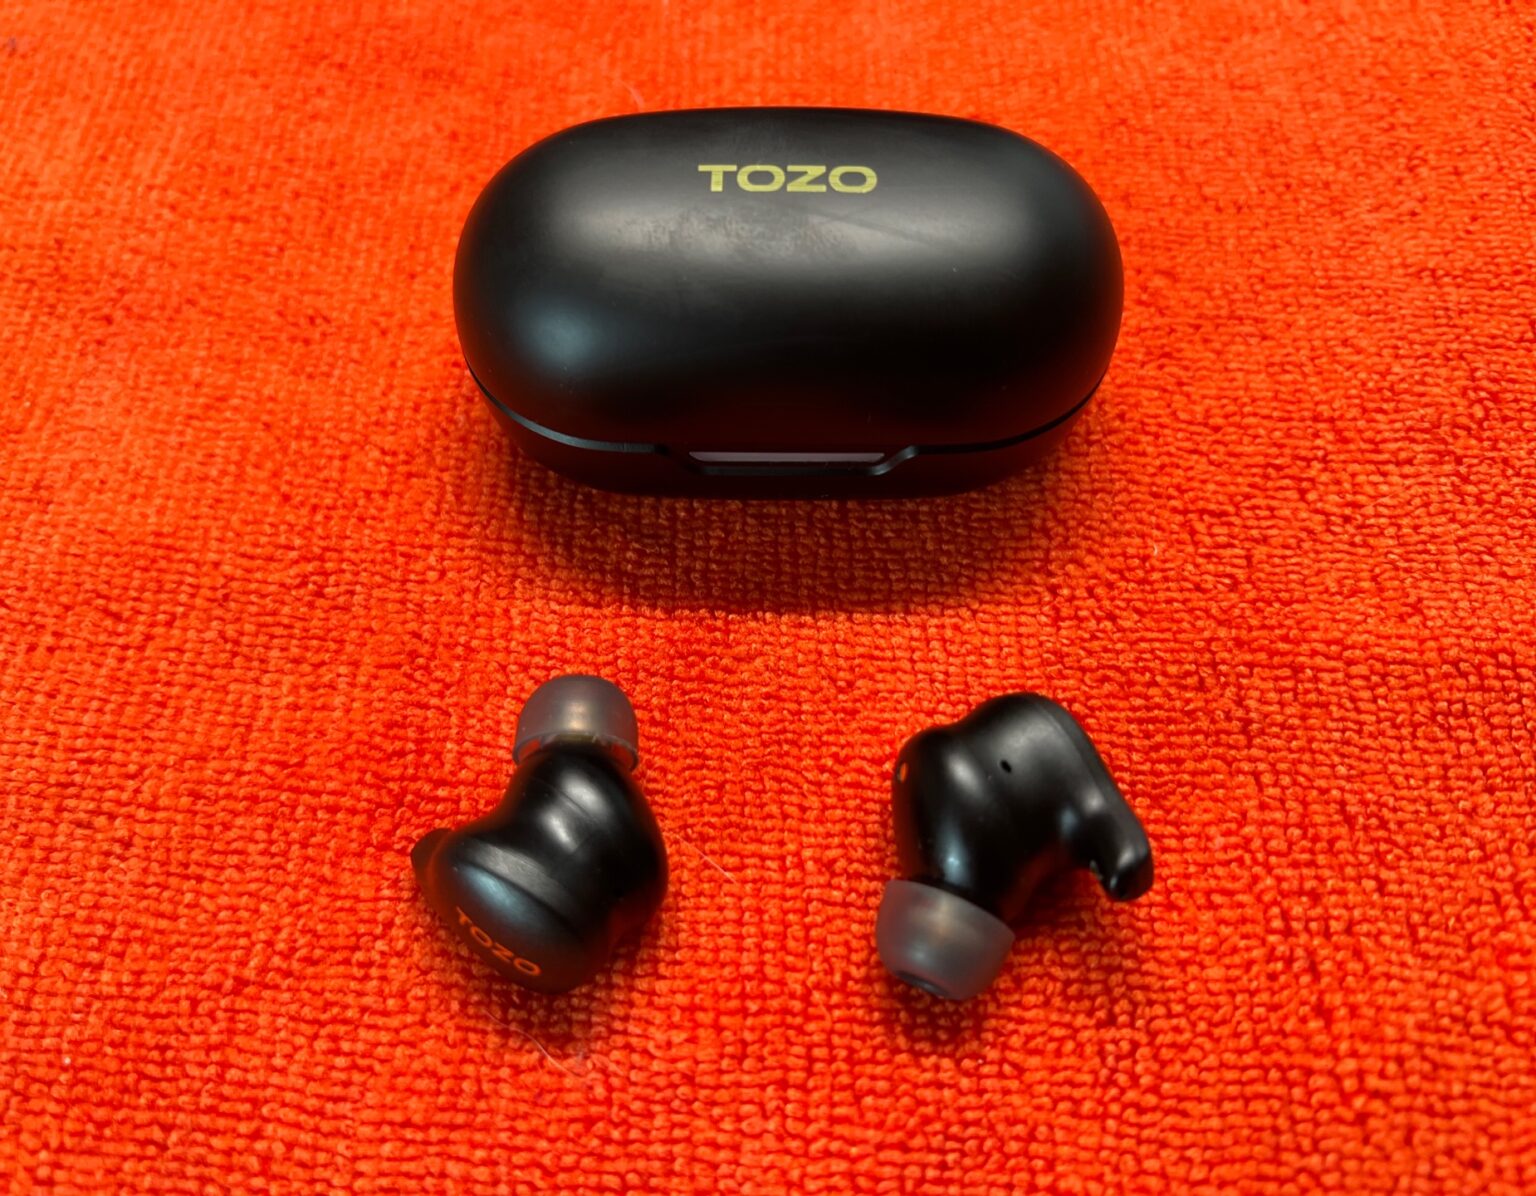 Tozo's new flagship earbuds check most of the boxes for a reasonably low price. If the price drops, grab 'em.